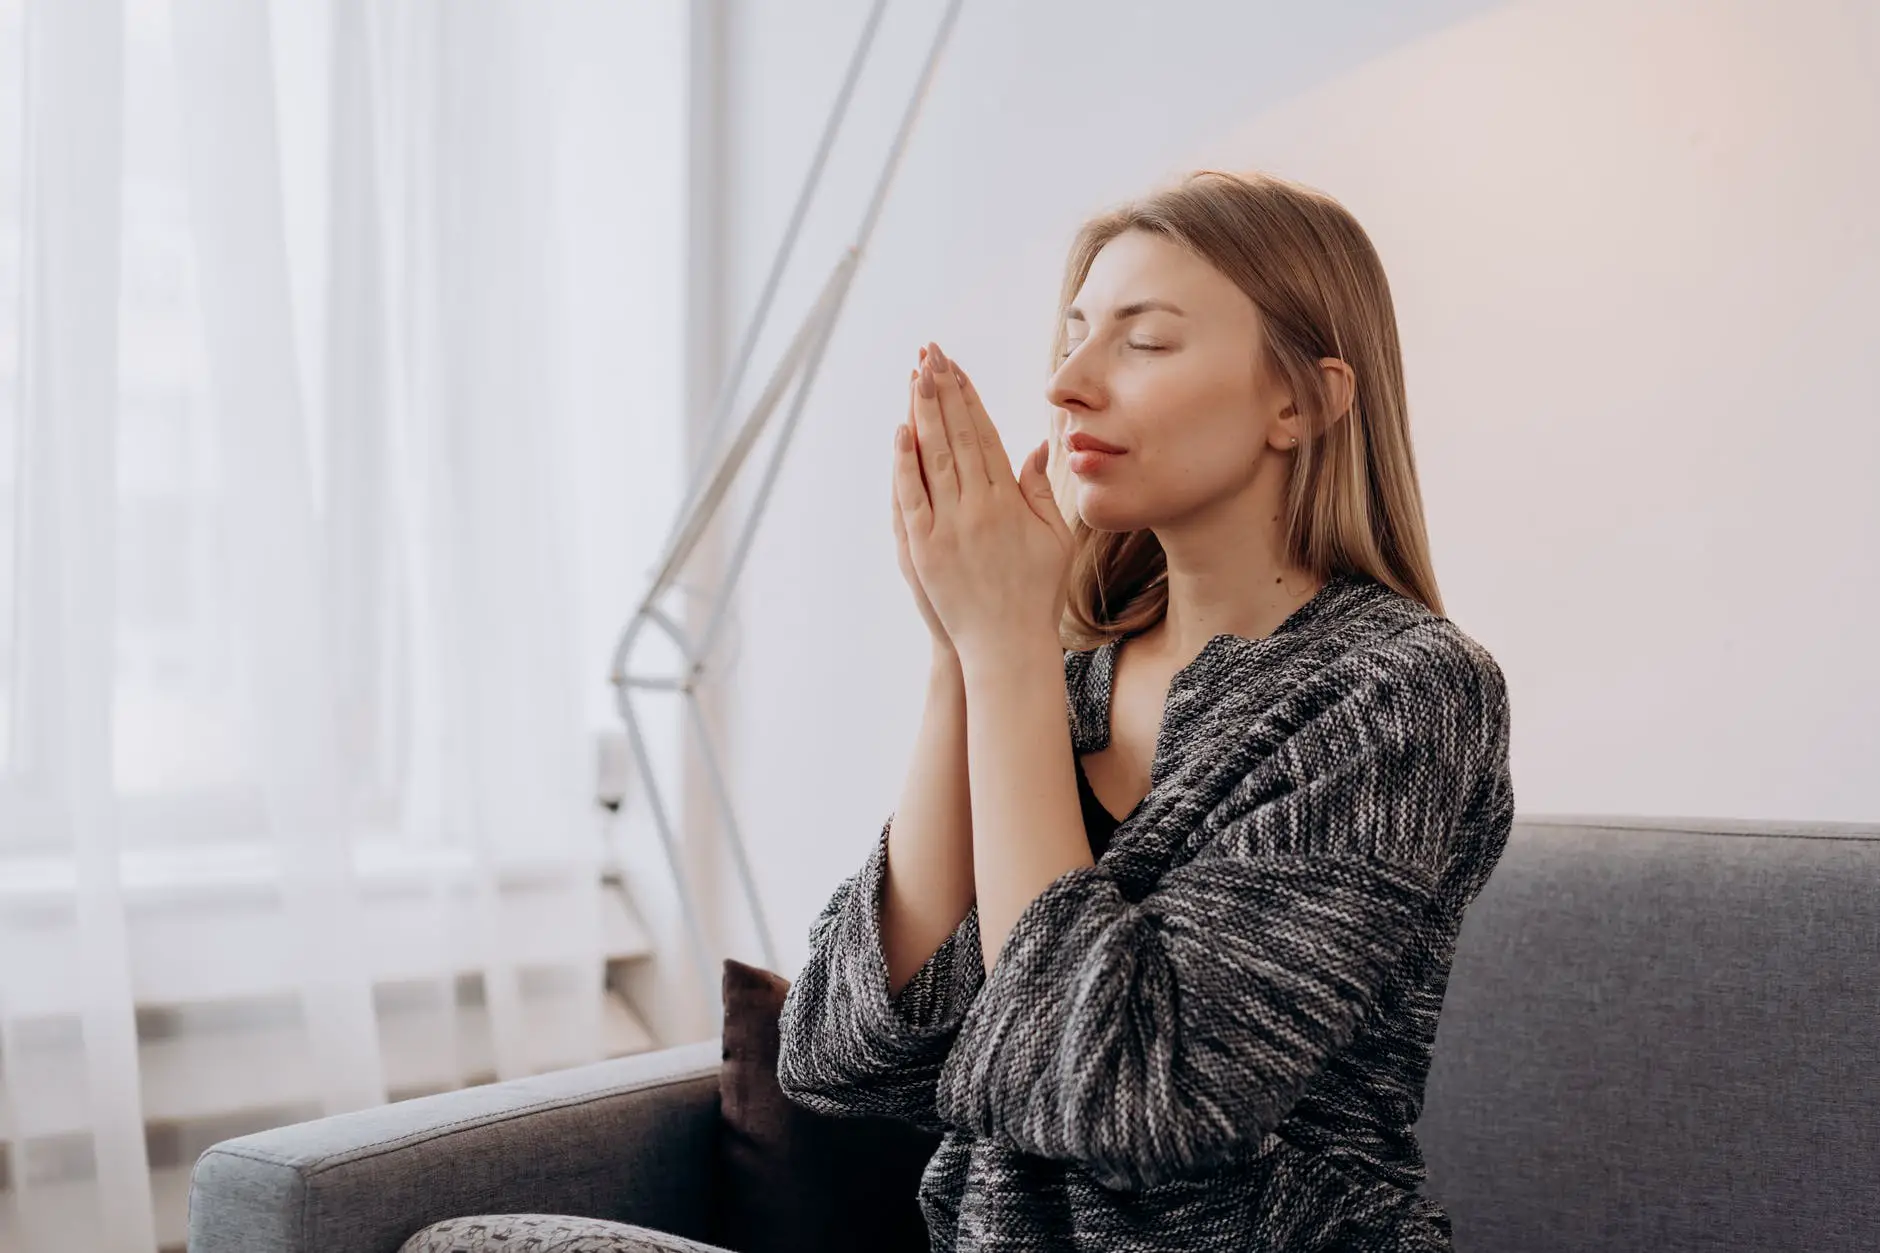 woman with her hands together rubbing essential oils between her palms and breathing deeply